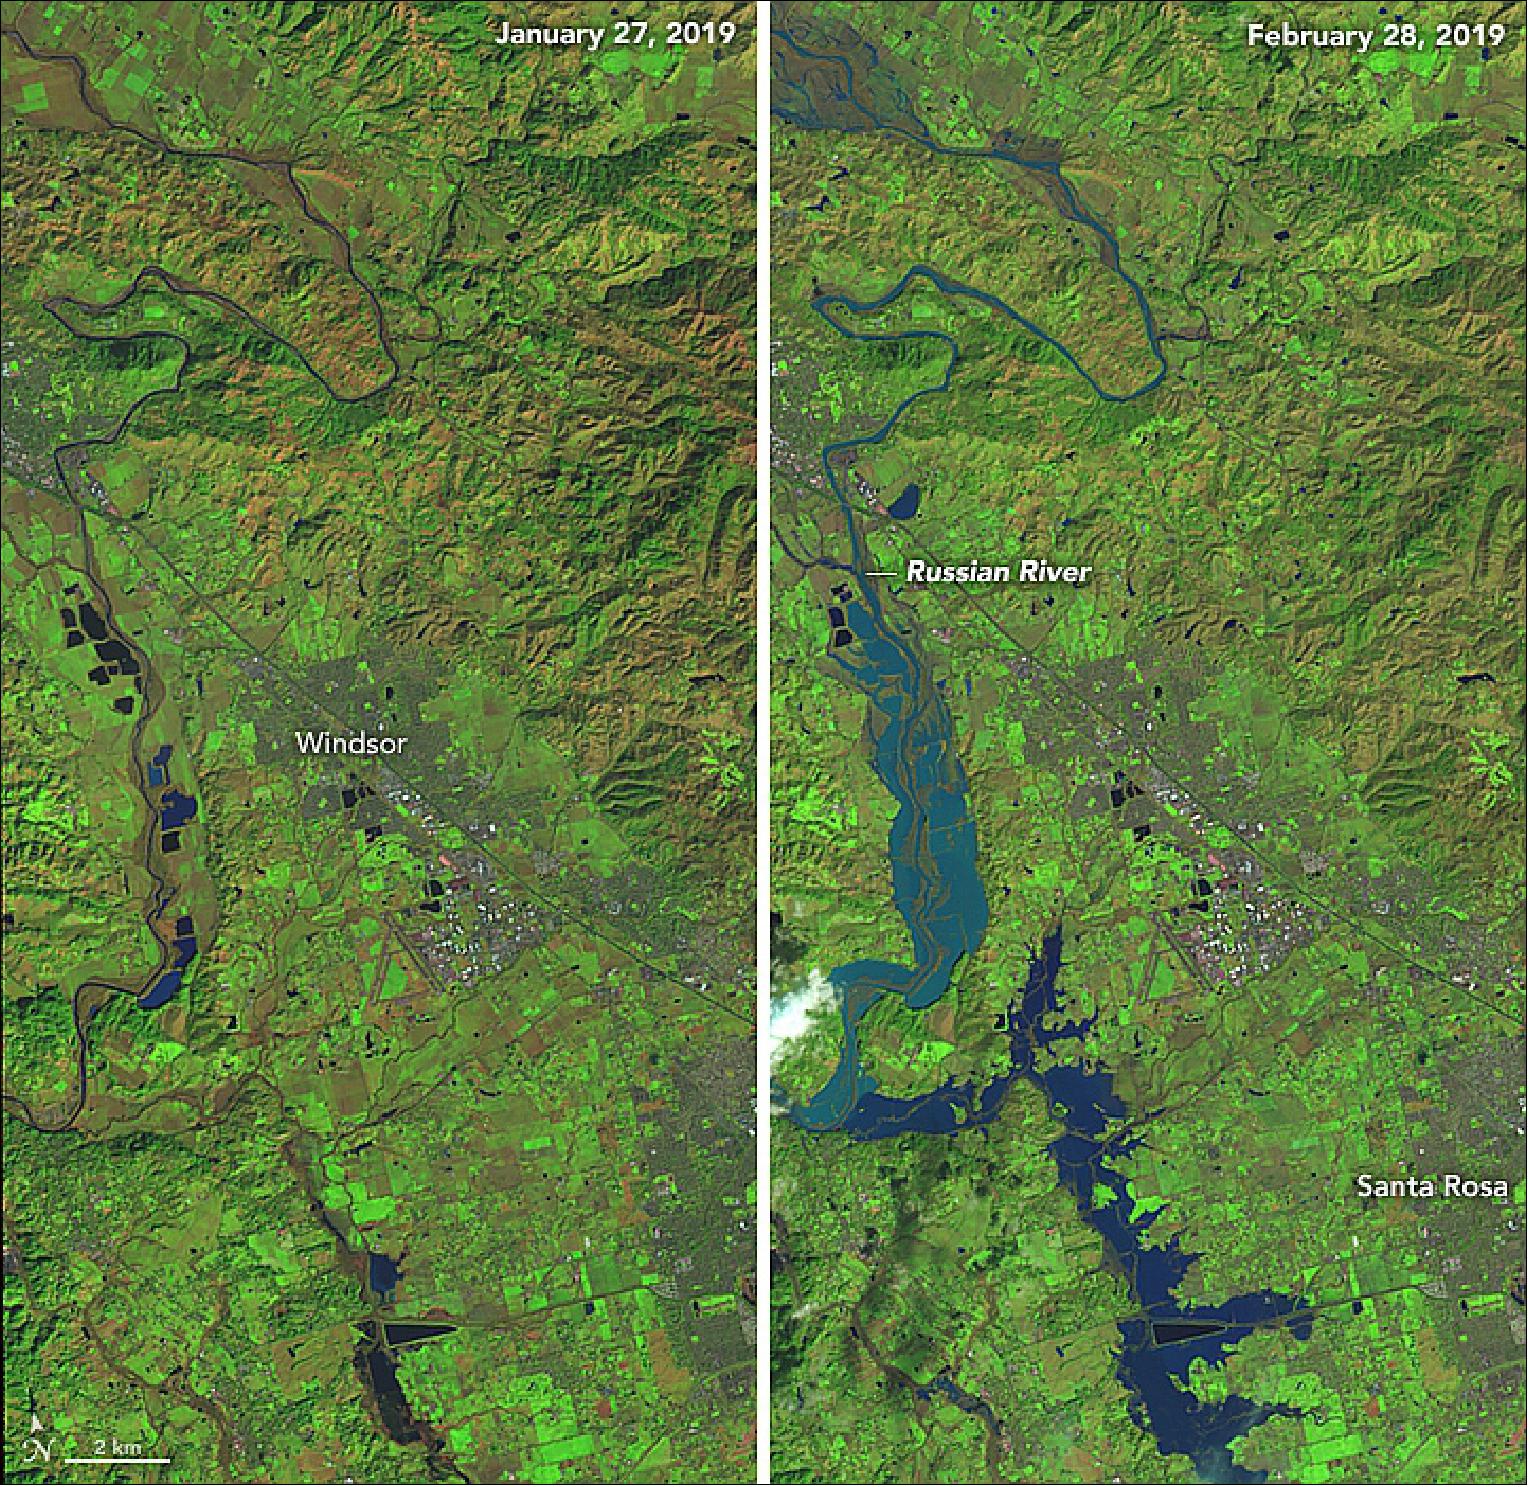 Figure 100: On 28 February 2019, OLI on Landsat-8 acquired a false-color view (bands 6-5-4) of flooding along the Russian River. It shows flood water west of Santa Rosa, near a point where the river takes a hard turn to the west toward Sebastopol and Guerneville (both under cloud cover). For comparison, the left image shows the area on January 27, 2019. Flood waters appear blue; vegetation is green; and bare ground is brown (image credit: NASA Earth Observatory, images by Lauren Dauphin, using Landsat data from the USGS, story by Mike Carlowicz)